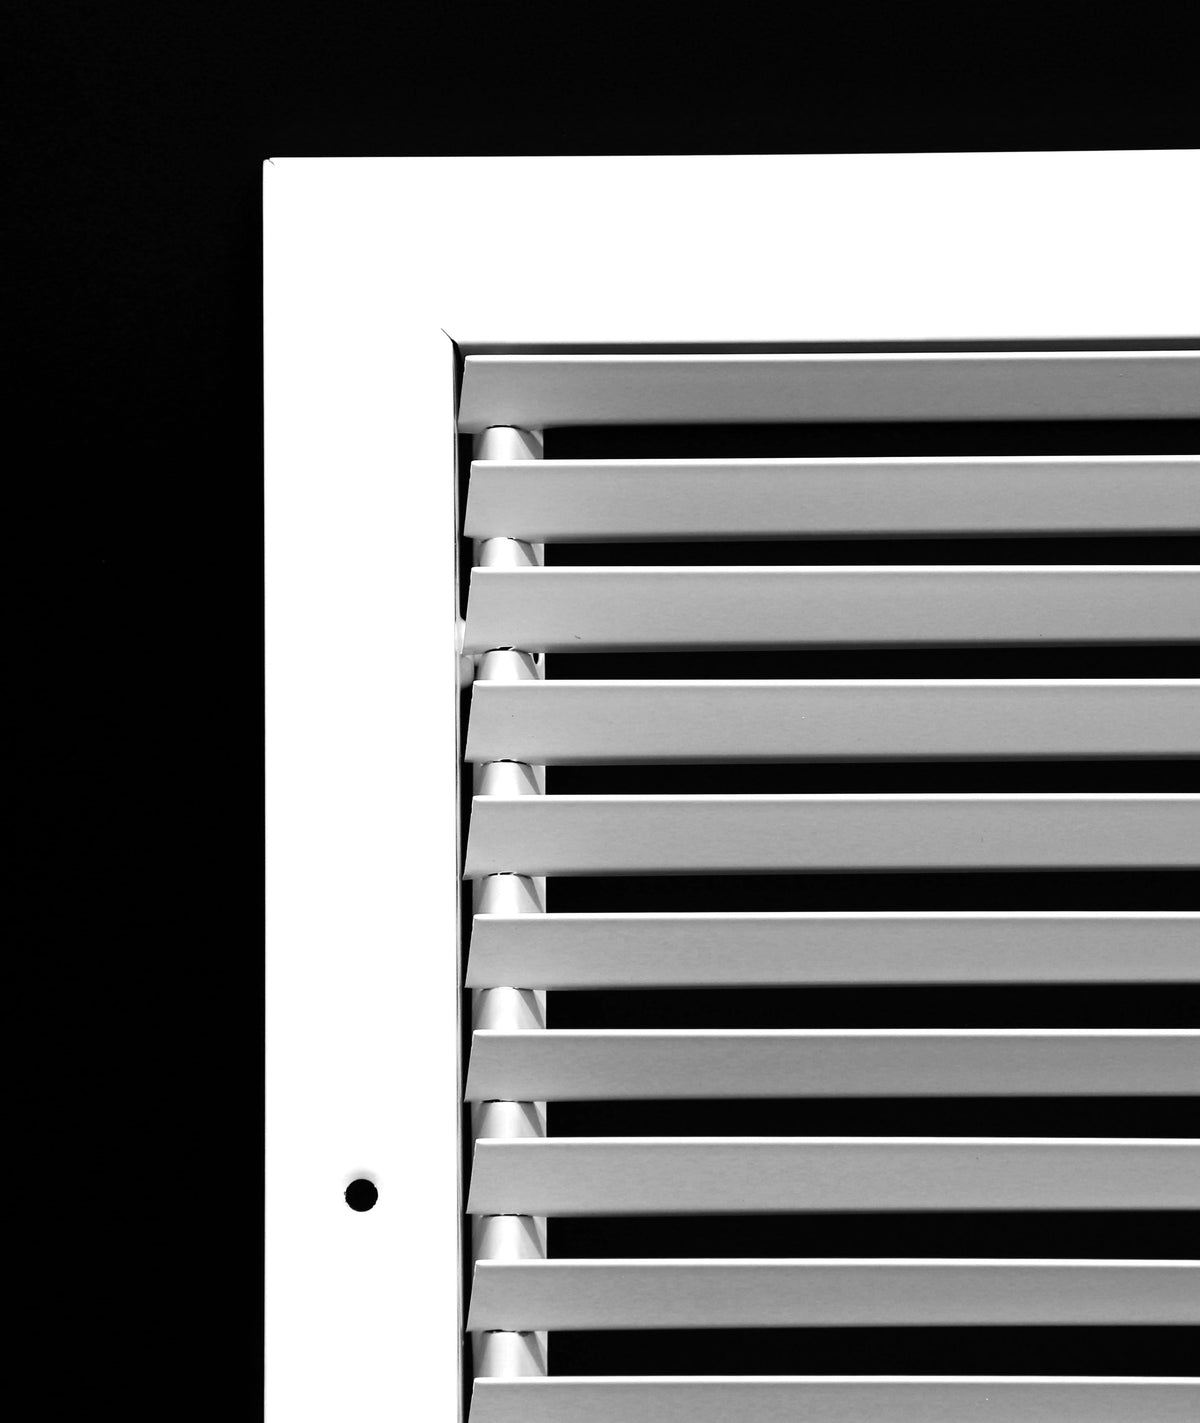 10&quot; x 10&quot; Fixed Bar Return Grille - Sidewall and Ceiling